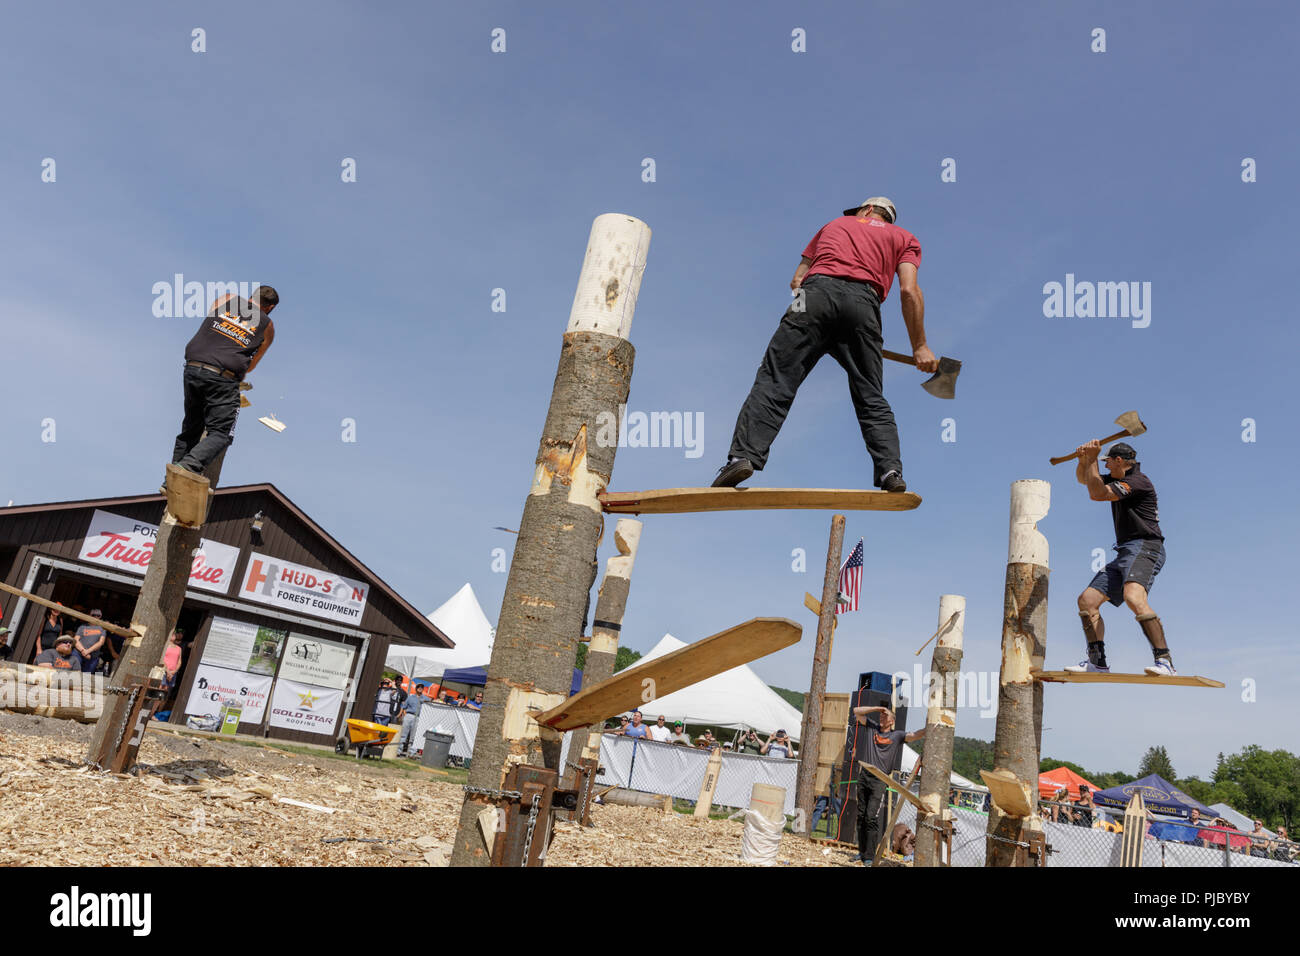 Men compete in lumberjack competition, Cherry Valley Outdoor Games, Otsego County, New York State. Stock Photo